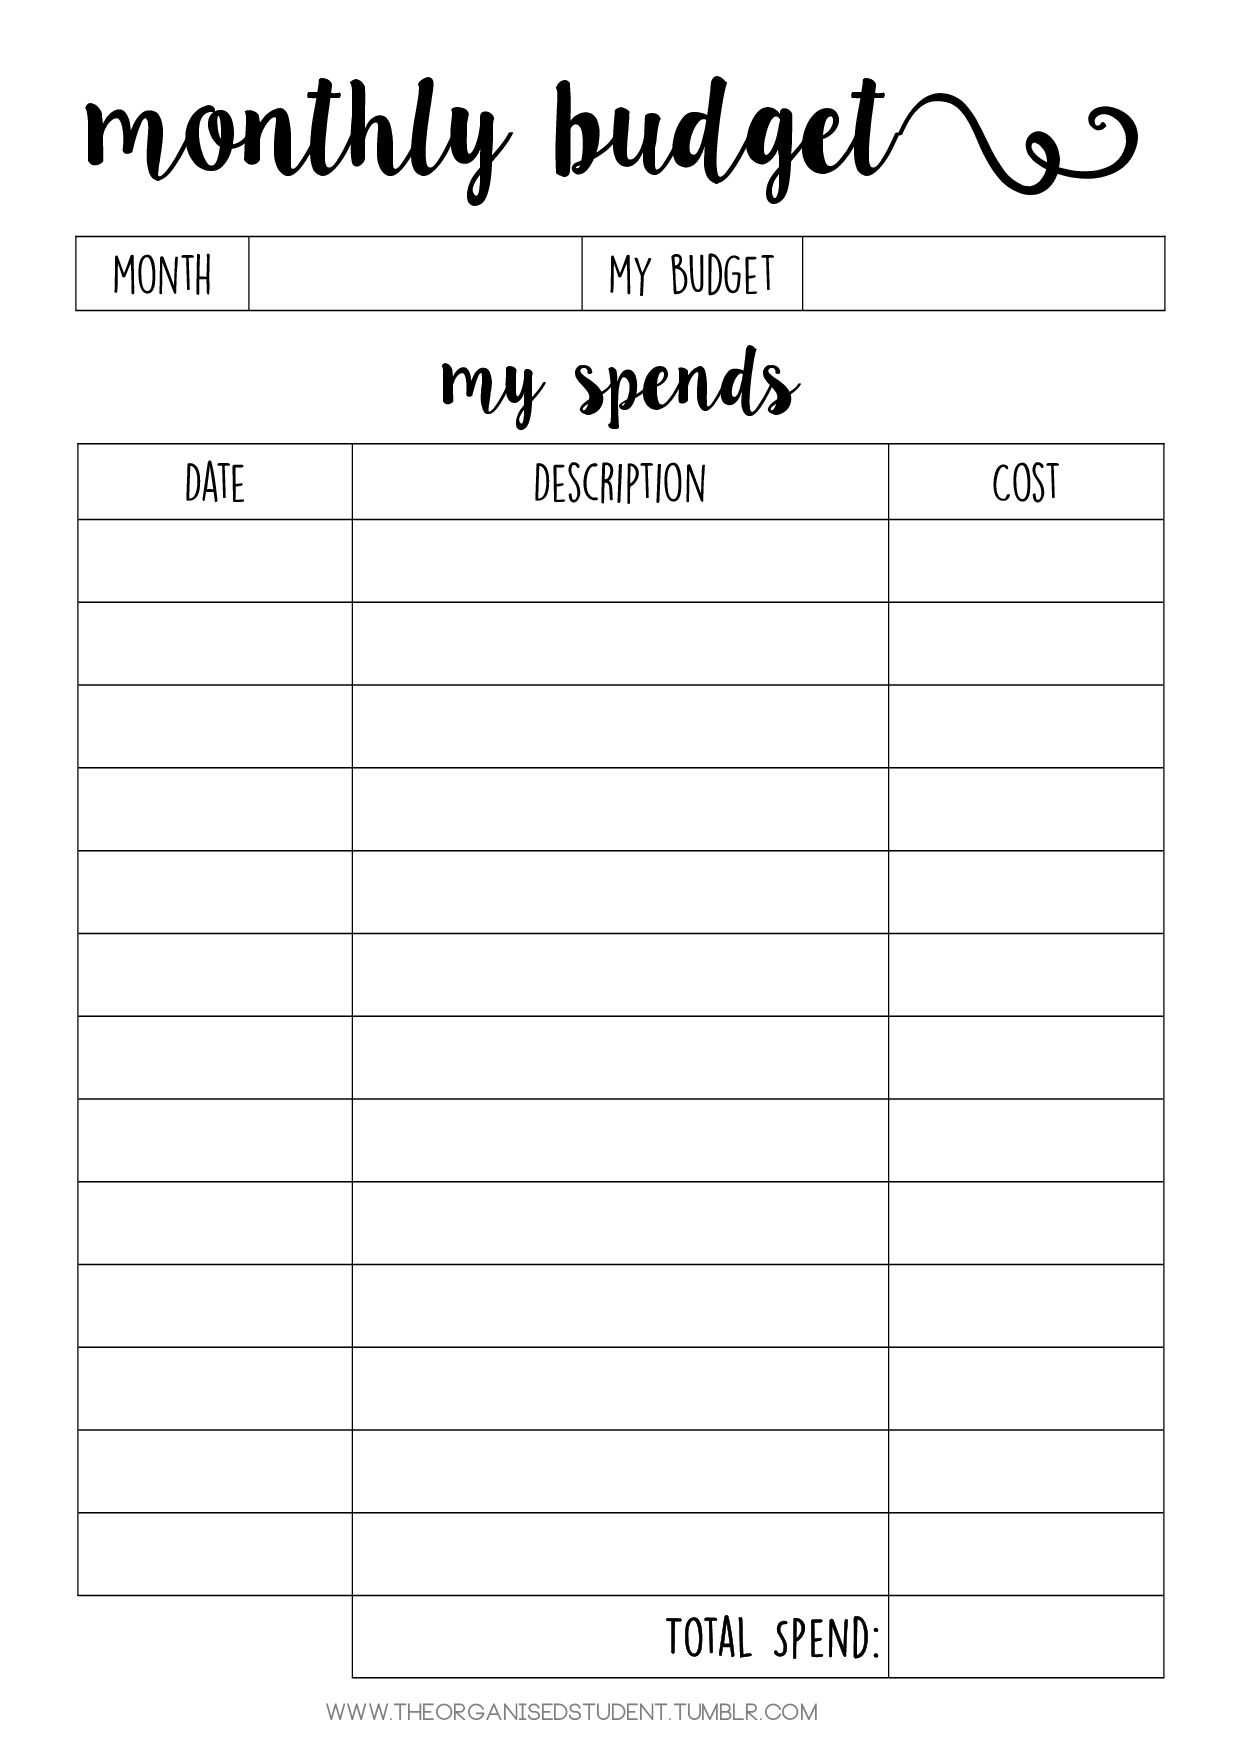 Monthly Budget Worksheet Pdf as Well as Hello Everyone Here are some New Printables that I Ve Been Working